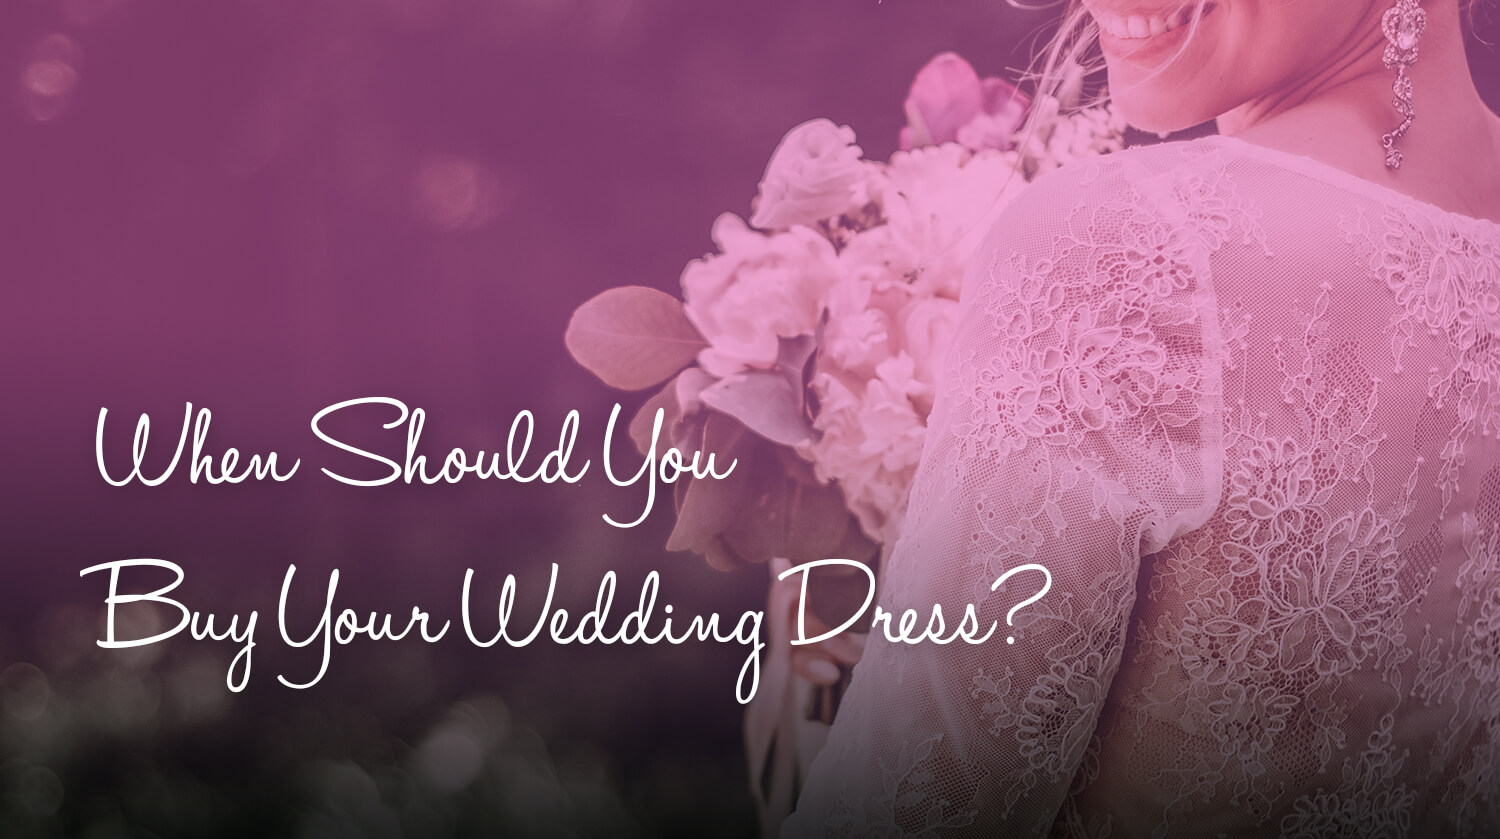 When Should You Buy Your Wedding Dress?